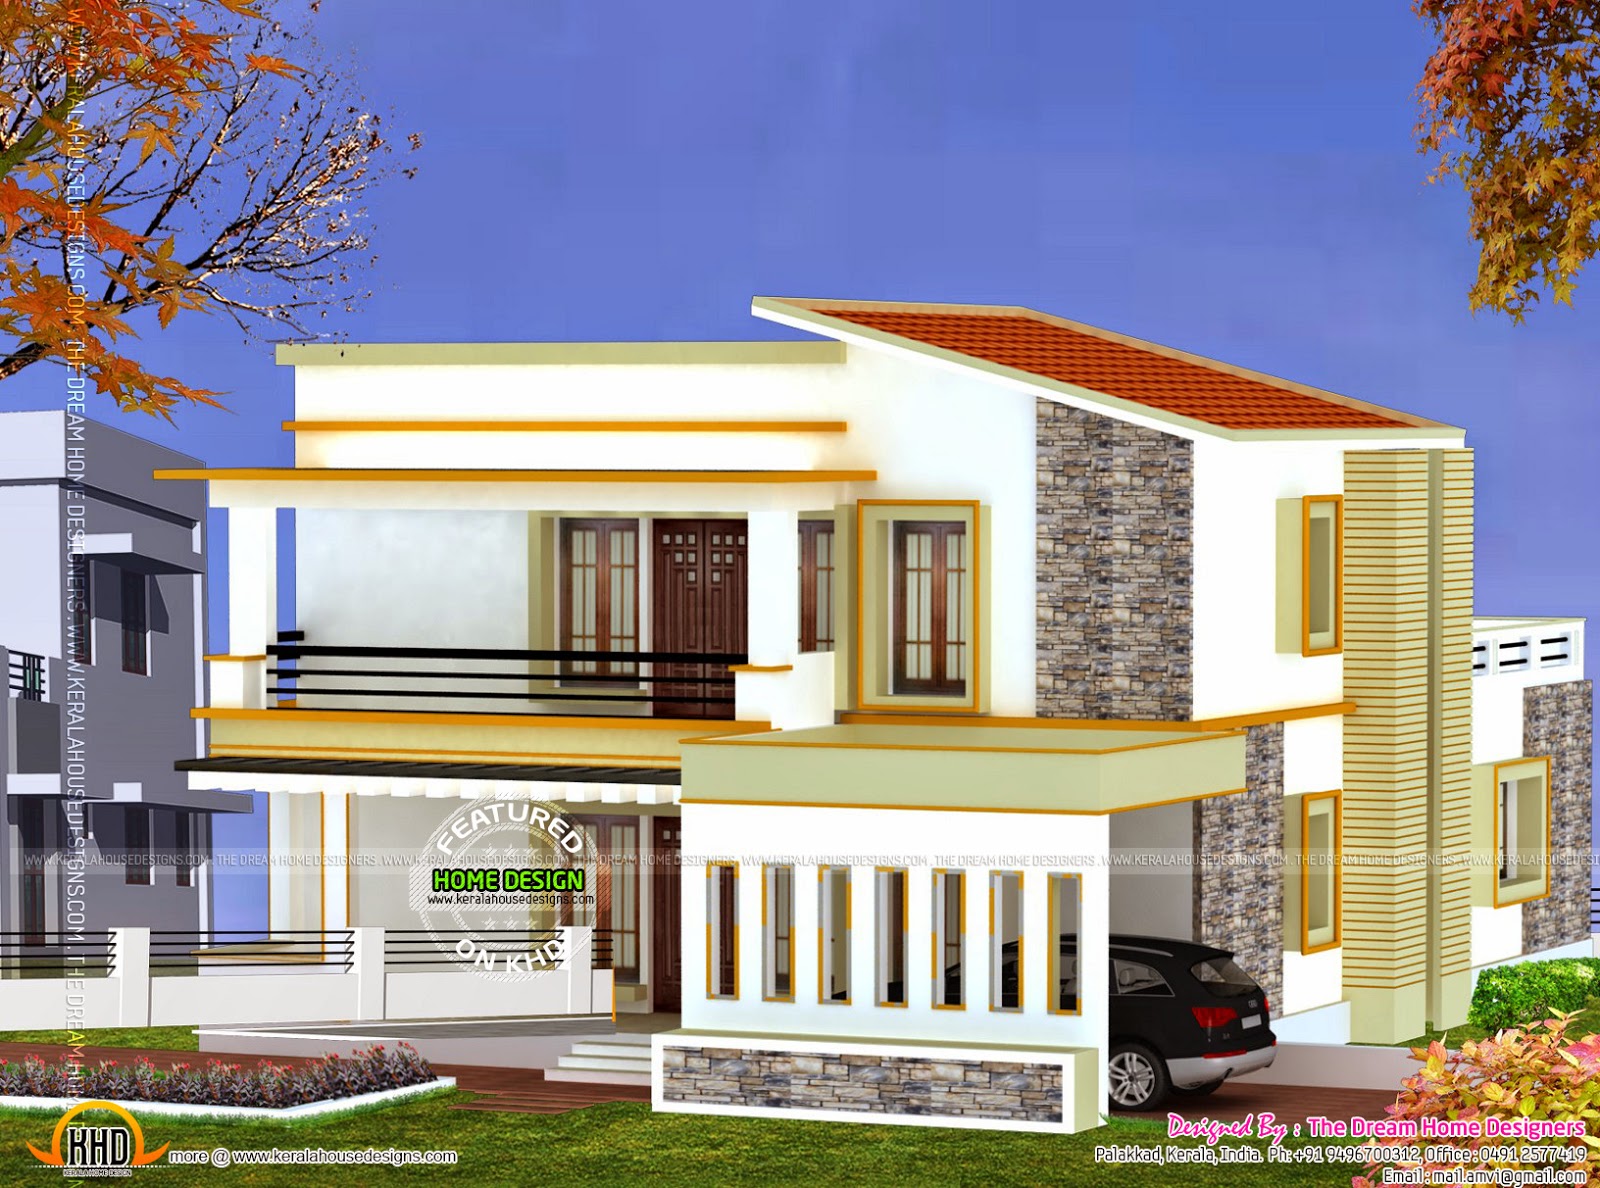  3d  view and floor plan  Kerala home  design  and floor plans 